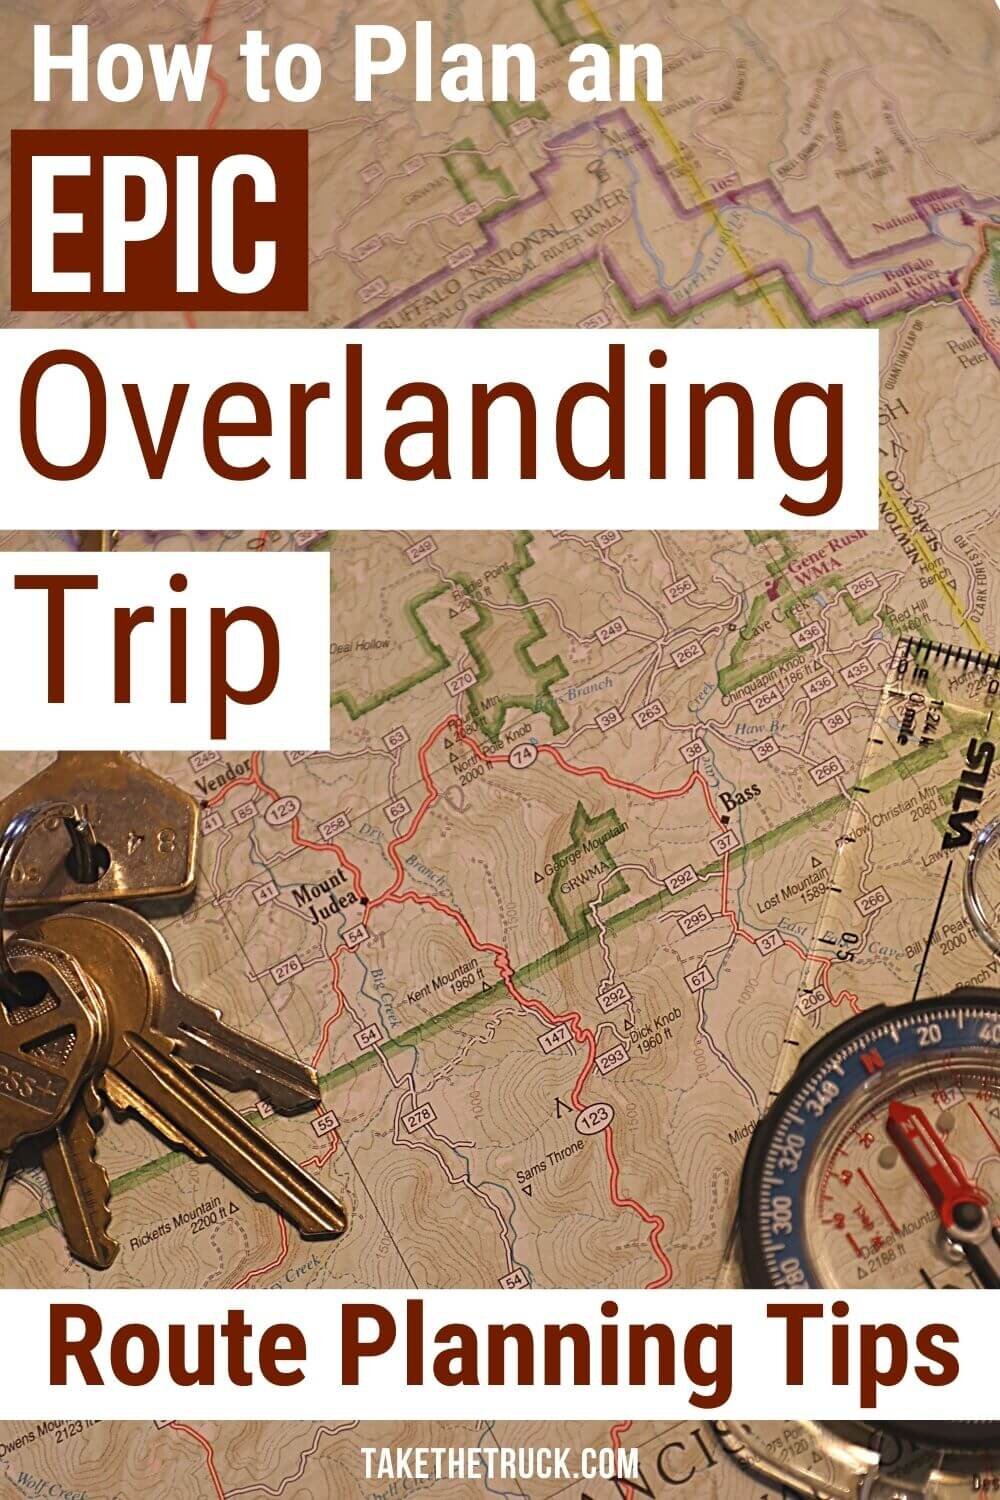 Want to find overlanding destinations &amp; places along with exciting overlanding routes? Learn to plan overlanding road trips, overlanding expeditions, or weekend overlanding trips with these tips!